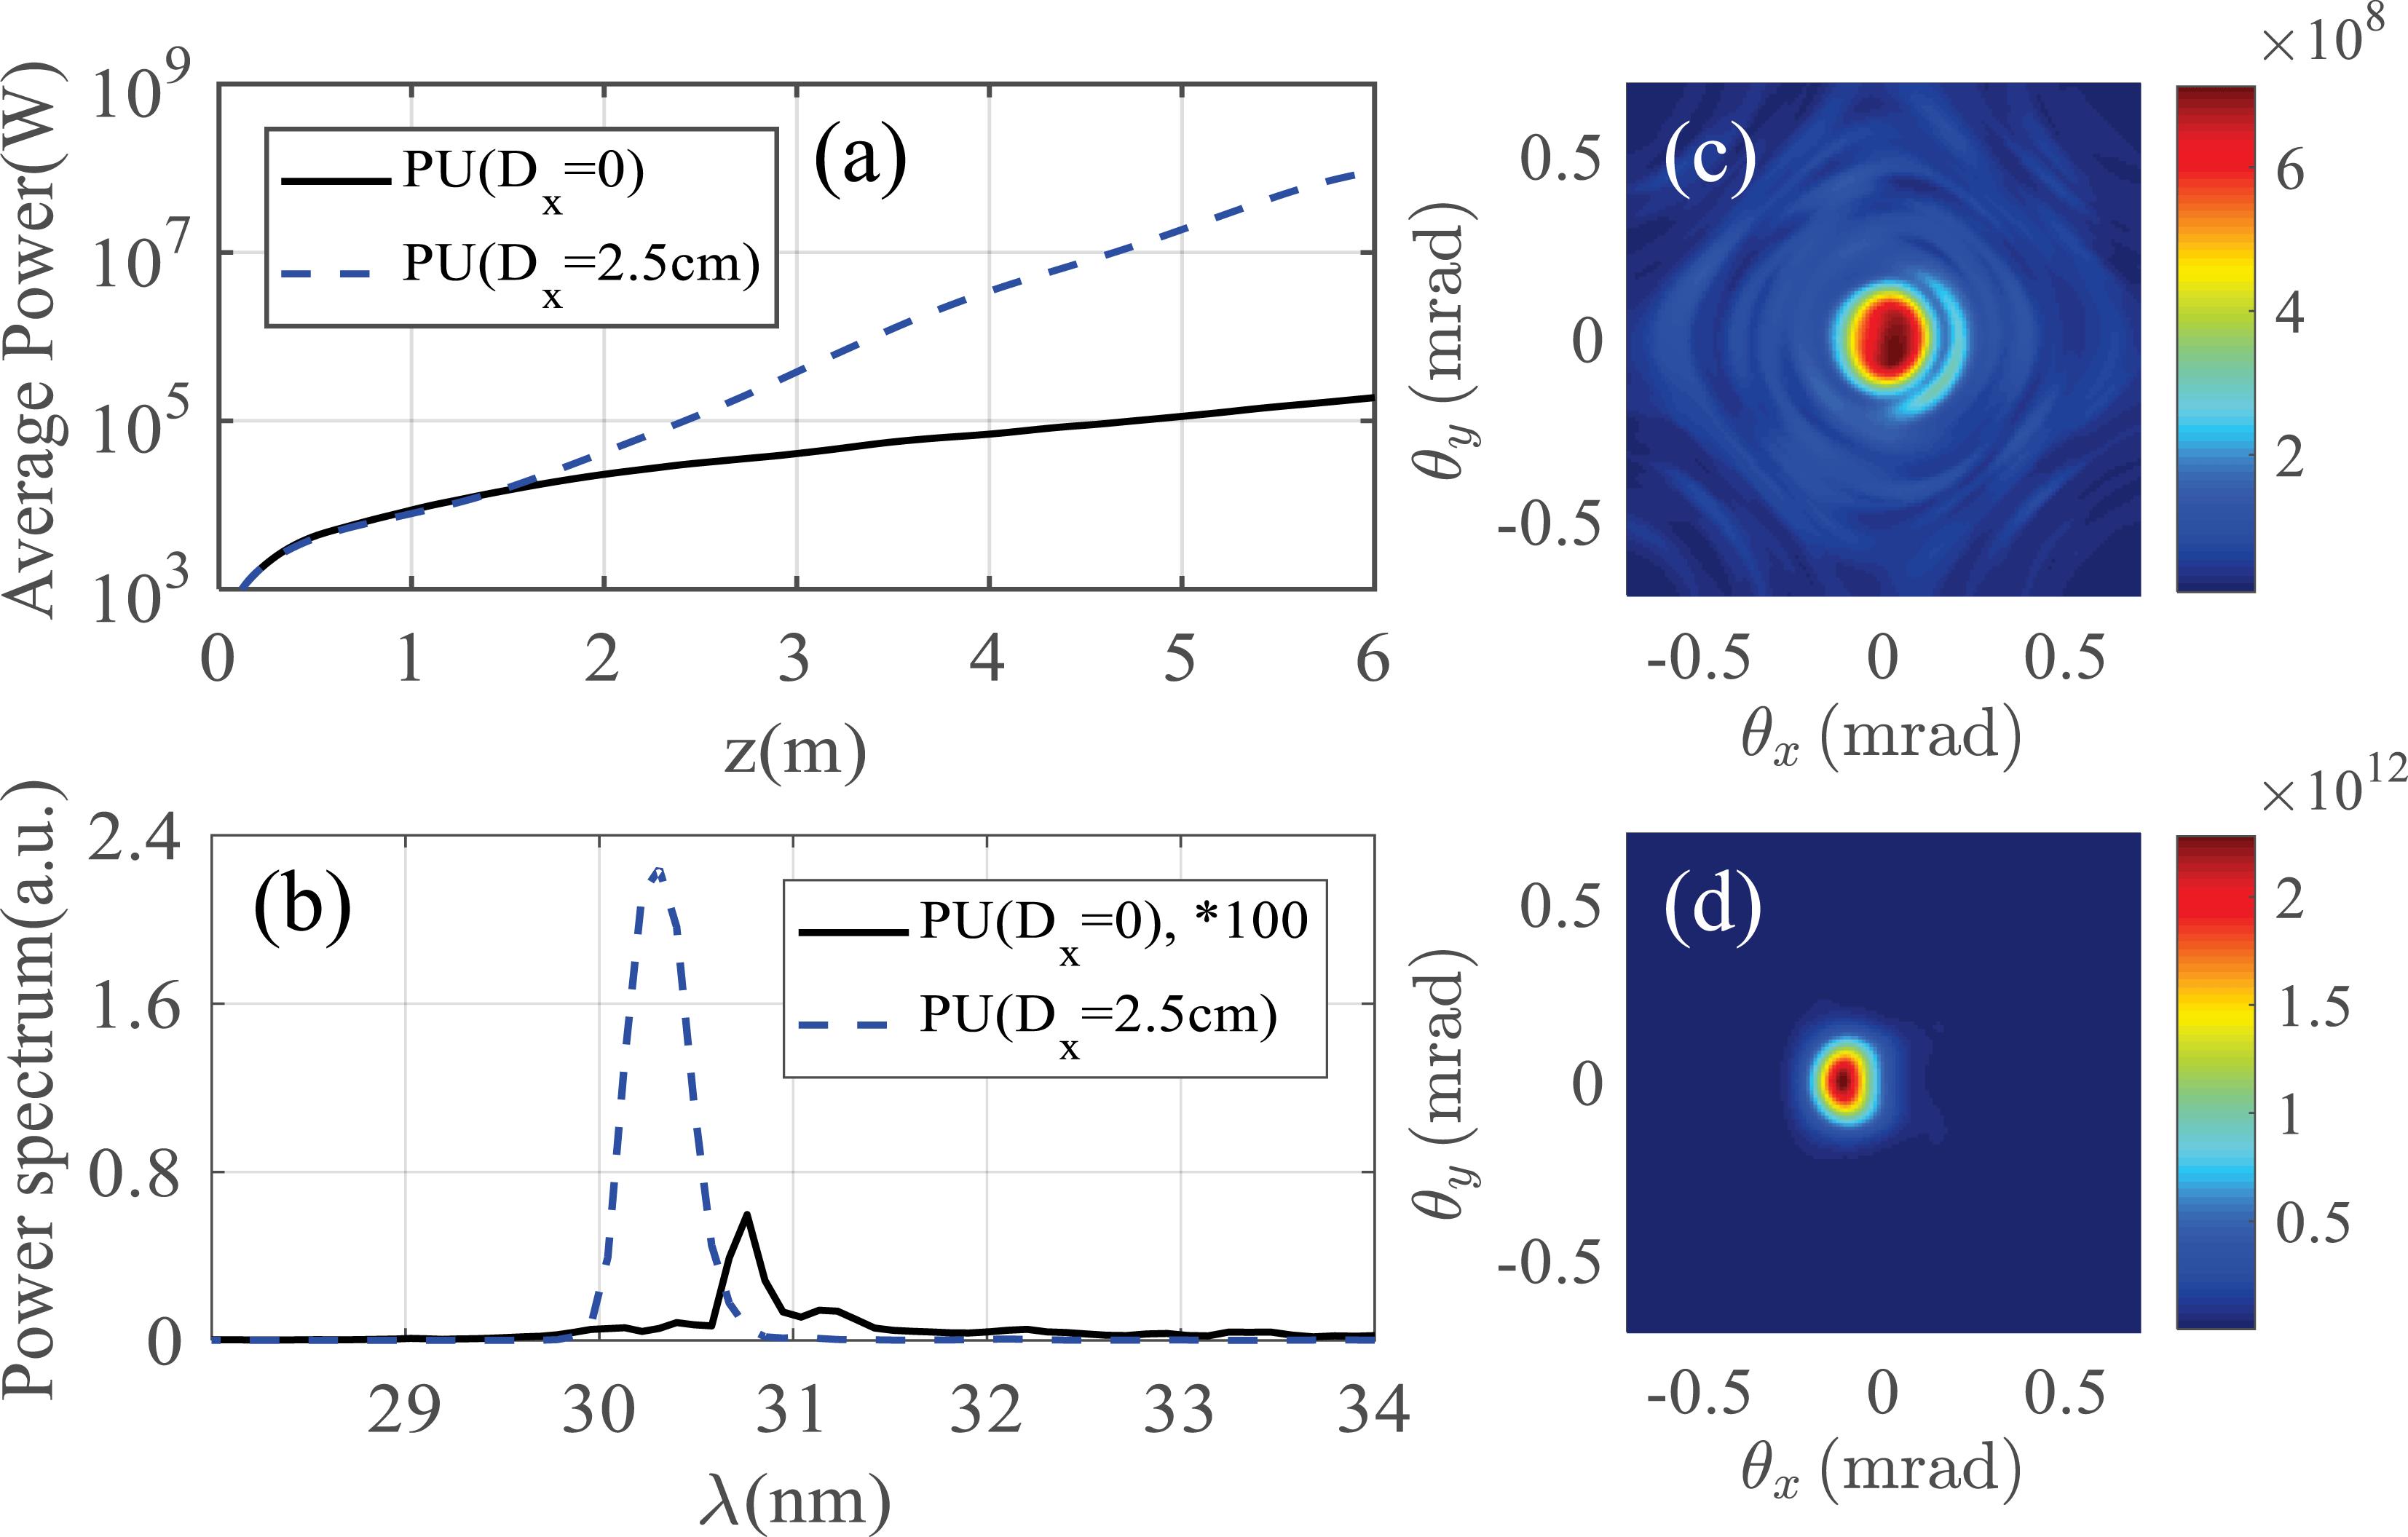 (a) Radiation power along the PU around 30 nm; (b) single-shot spectra of an SASE FEL; (c), (d) corresponding transverse angular profiles of the radiation power obtained bybeam without and with the horizontal dispersion.